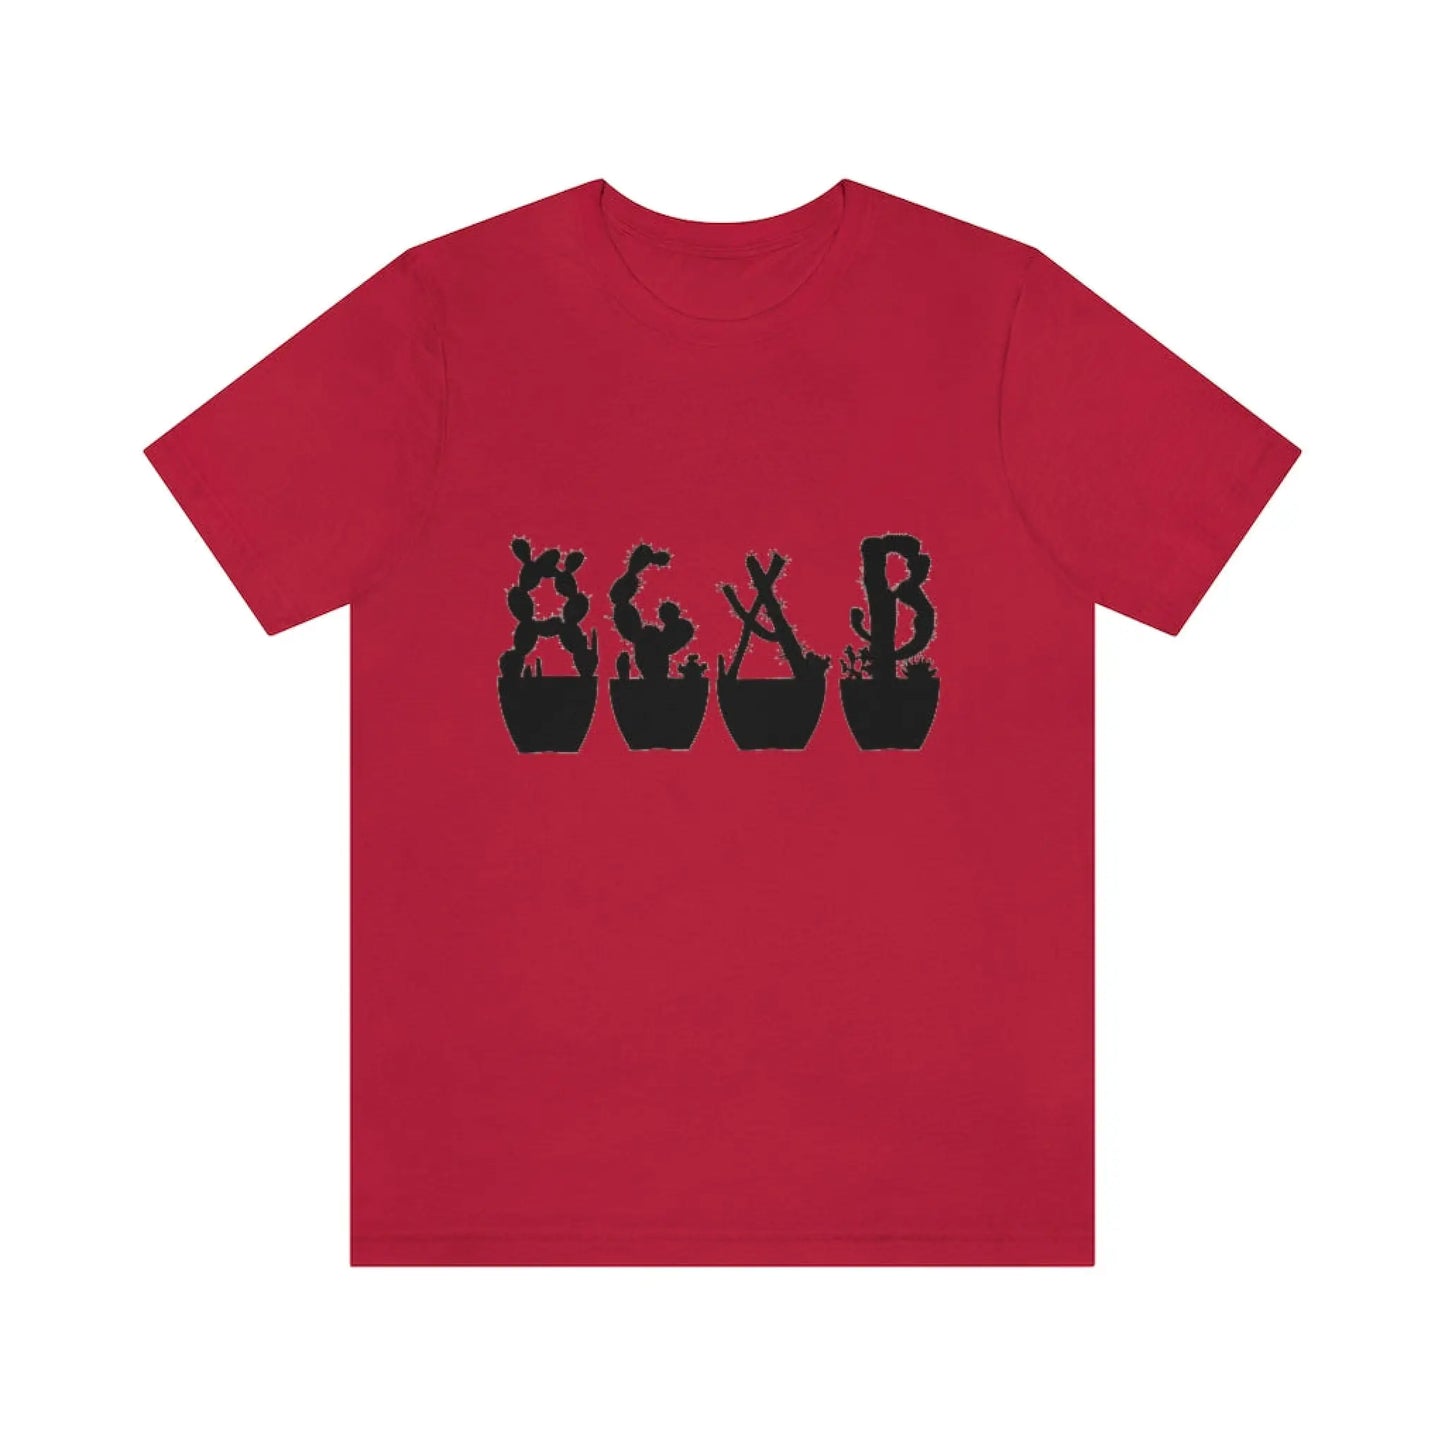 Shirts - Just Beautiful Cactuses - Red / S - T-Shirt